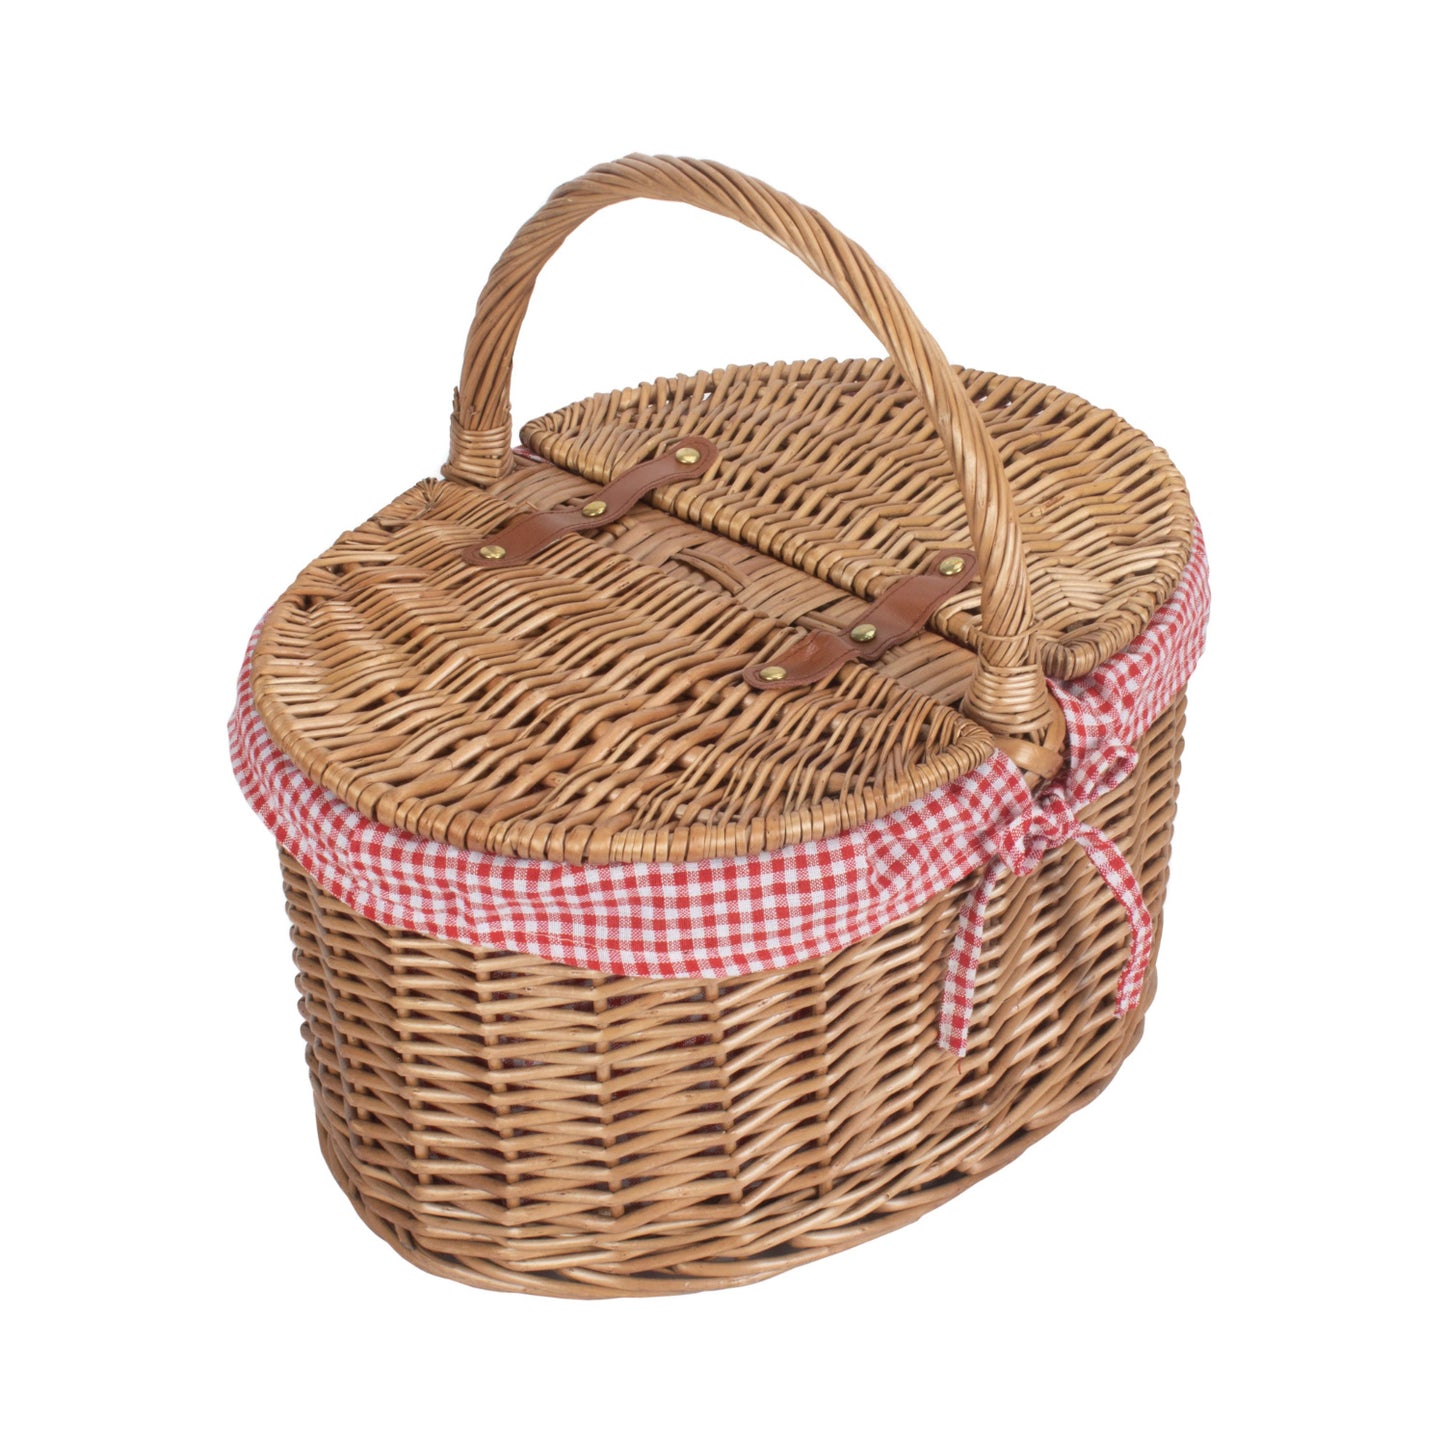 Light Steamed Oval Lidded Hamper With Red & White Checked Lining